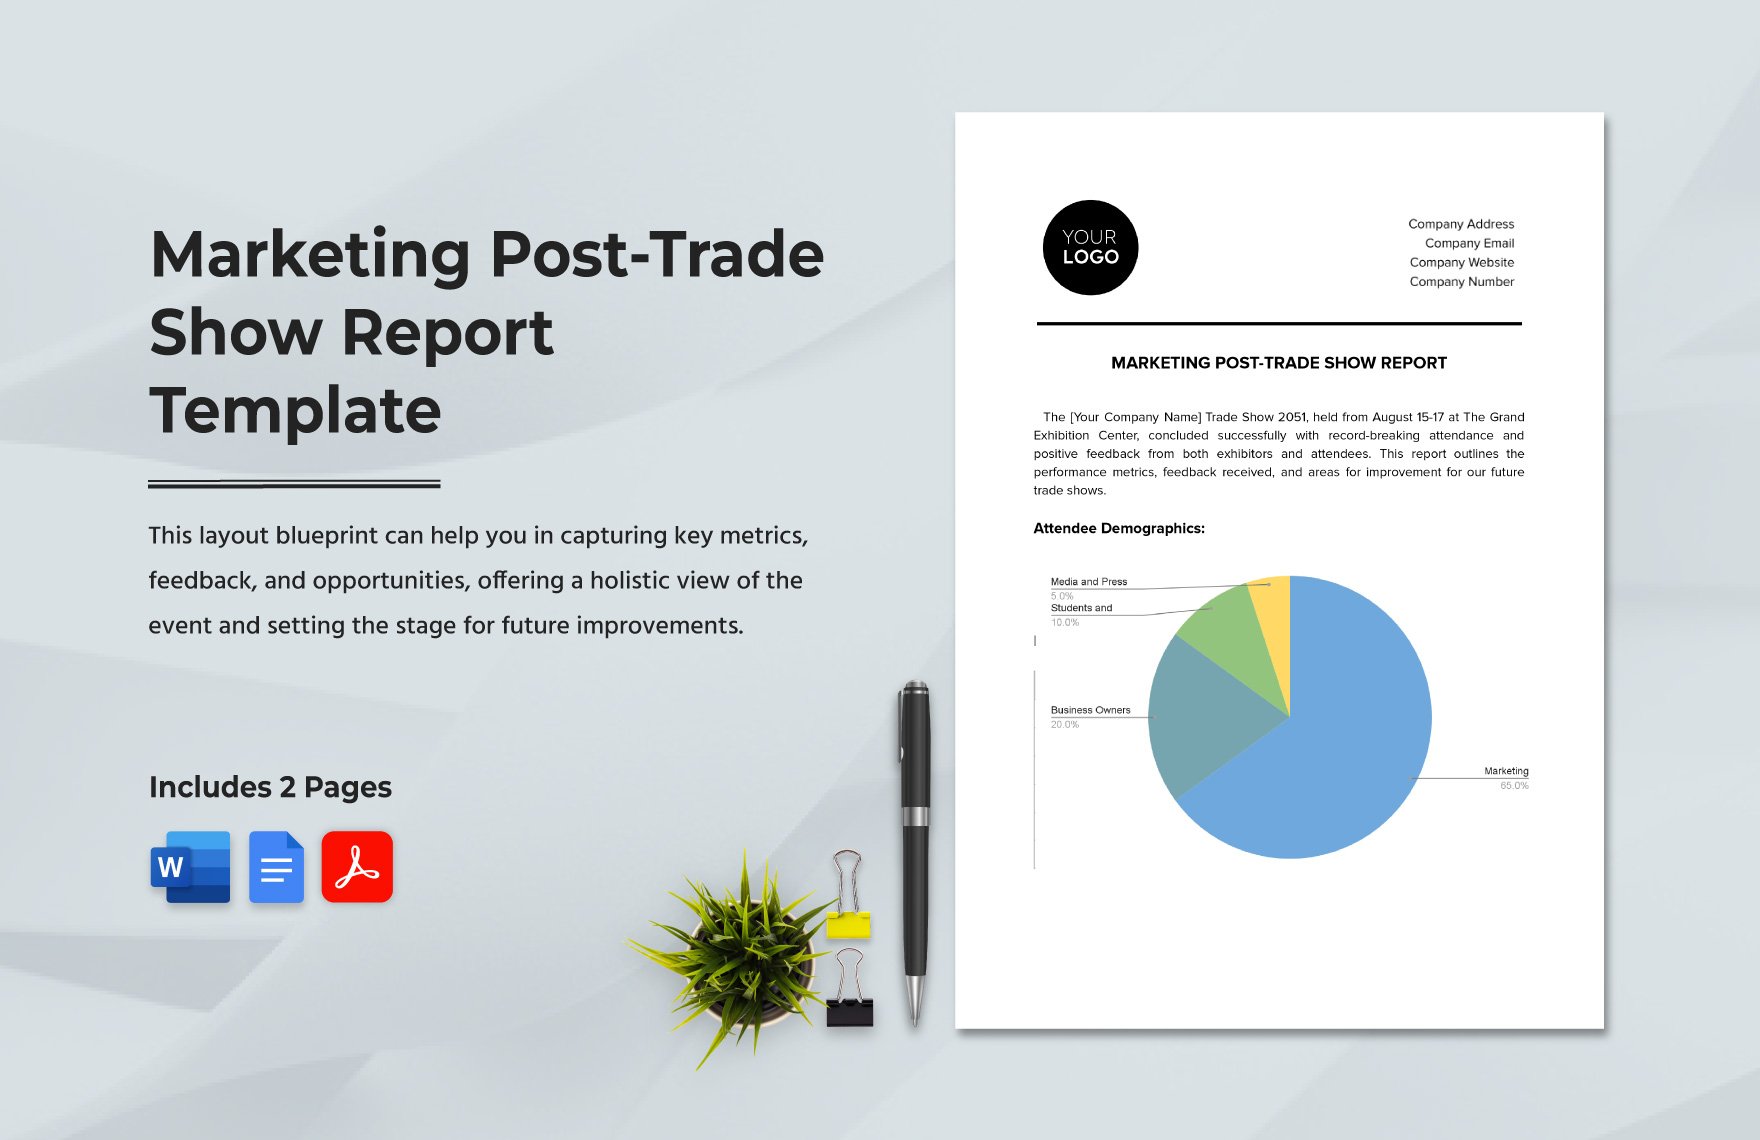 Marketing Post-Trade Show Report Template in Word, Google Docs, PDF